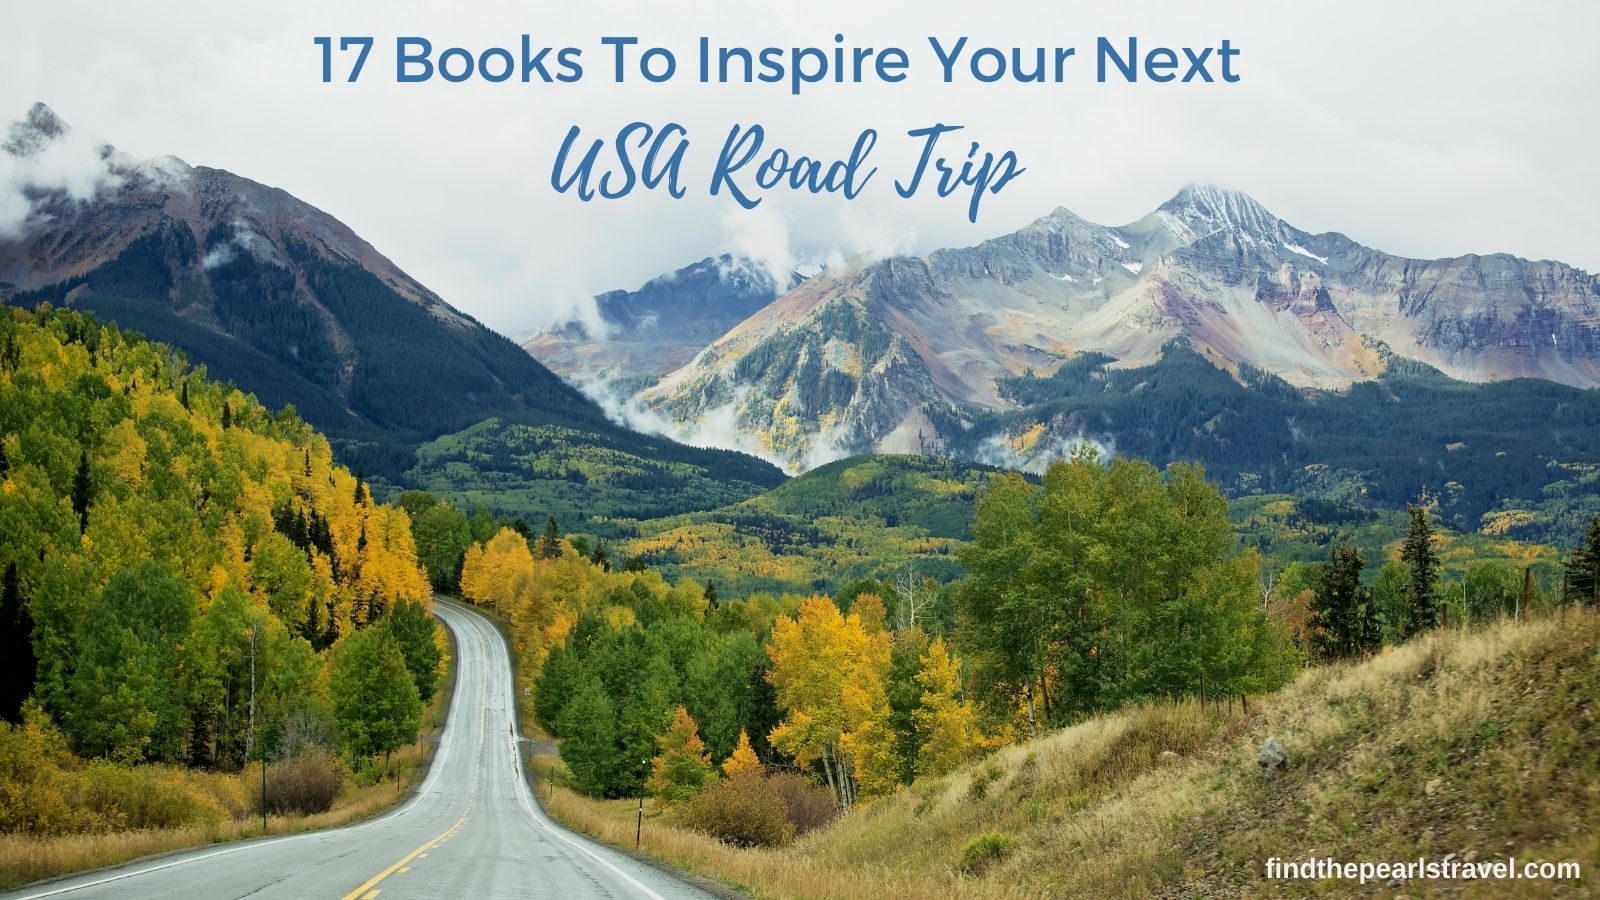 My U.S.A. Road Trip Personalized Storybook